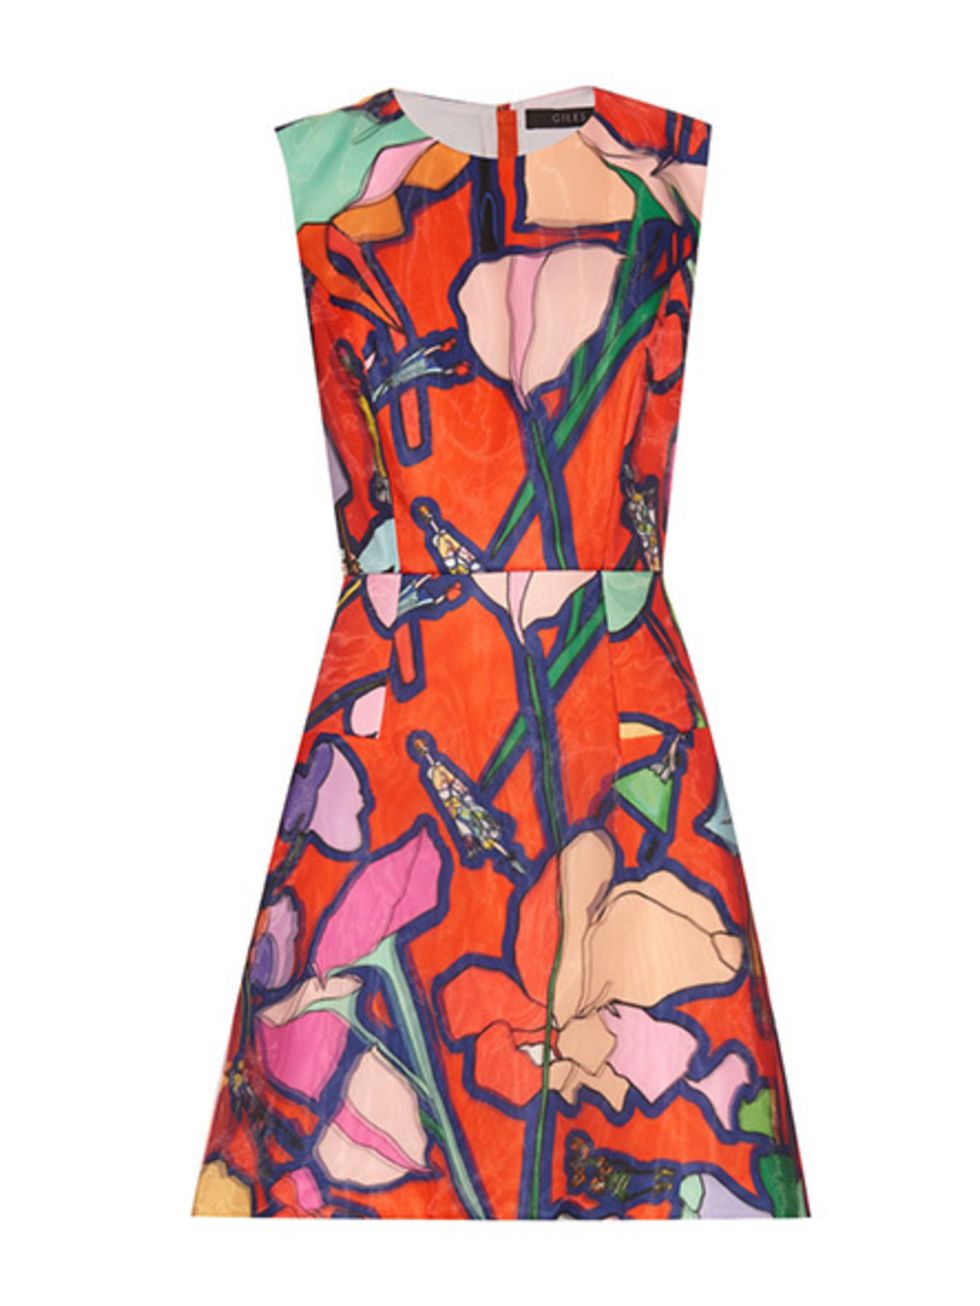 <p>Floral dress, £310, <a href="http://www.matchesfashion.com/products/Giles-Illustration-print-organza-dress-1039577">Giles at Matches</a></p>